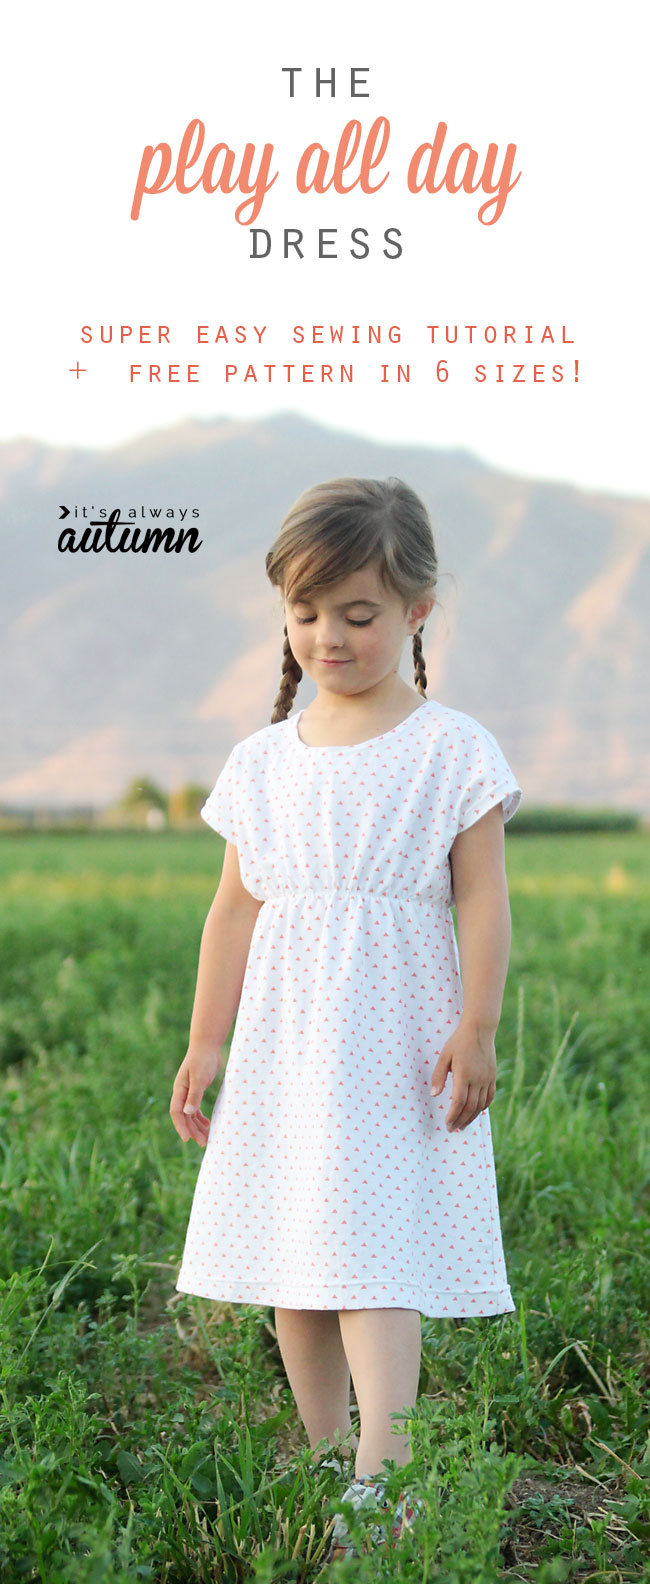 Little Sunshine Dress - PDF Sewing Pattern For Girls - Sewing For A Living